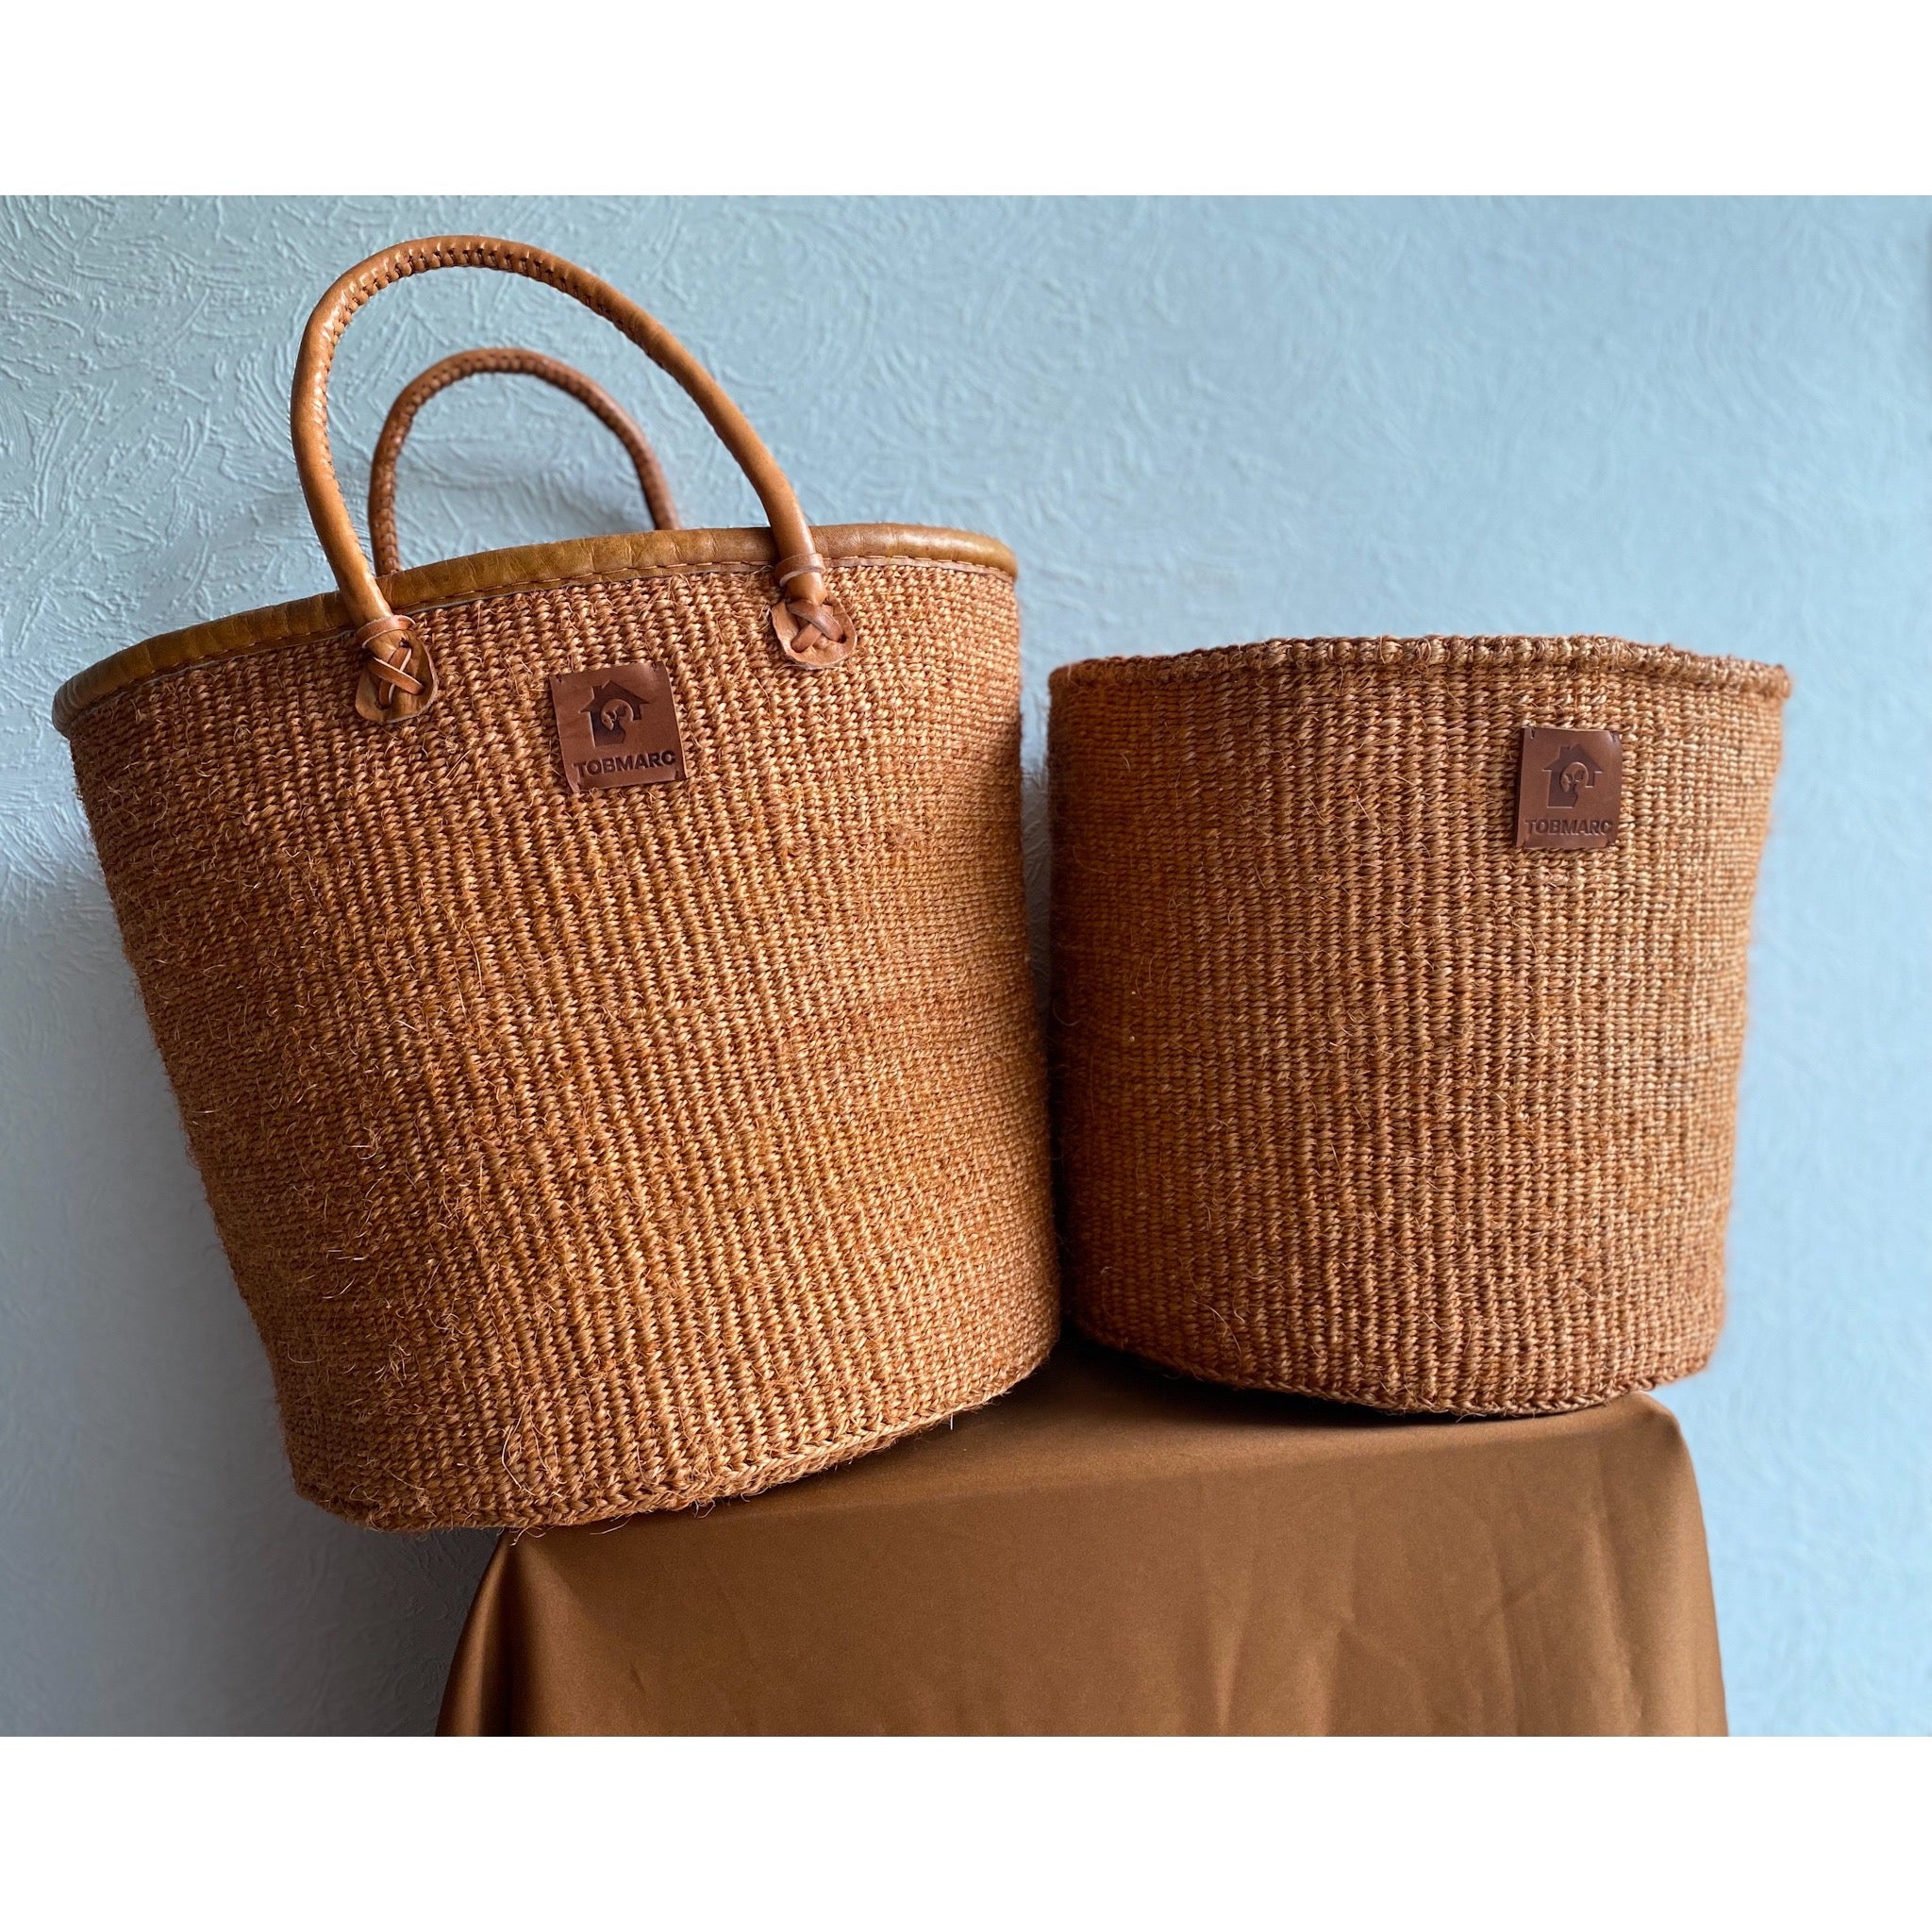 Woven basket, African basket, Market basket with leather handles, Woven tote bags, African storage basket, Gift for her, African bags - Tobmarc Home Decor & Gifts 